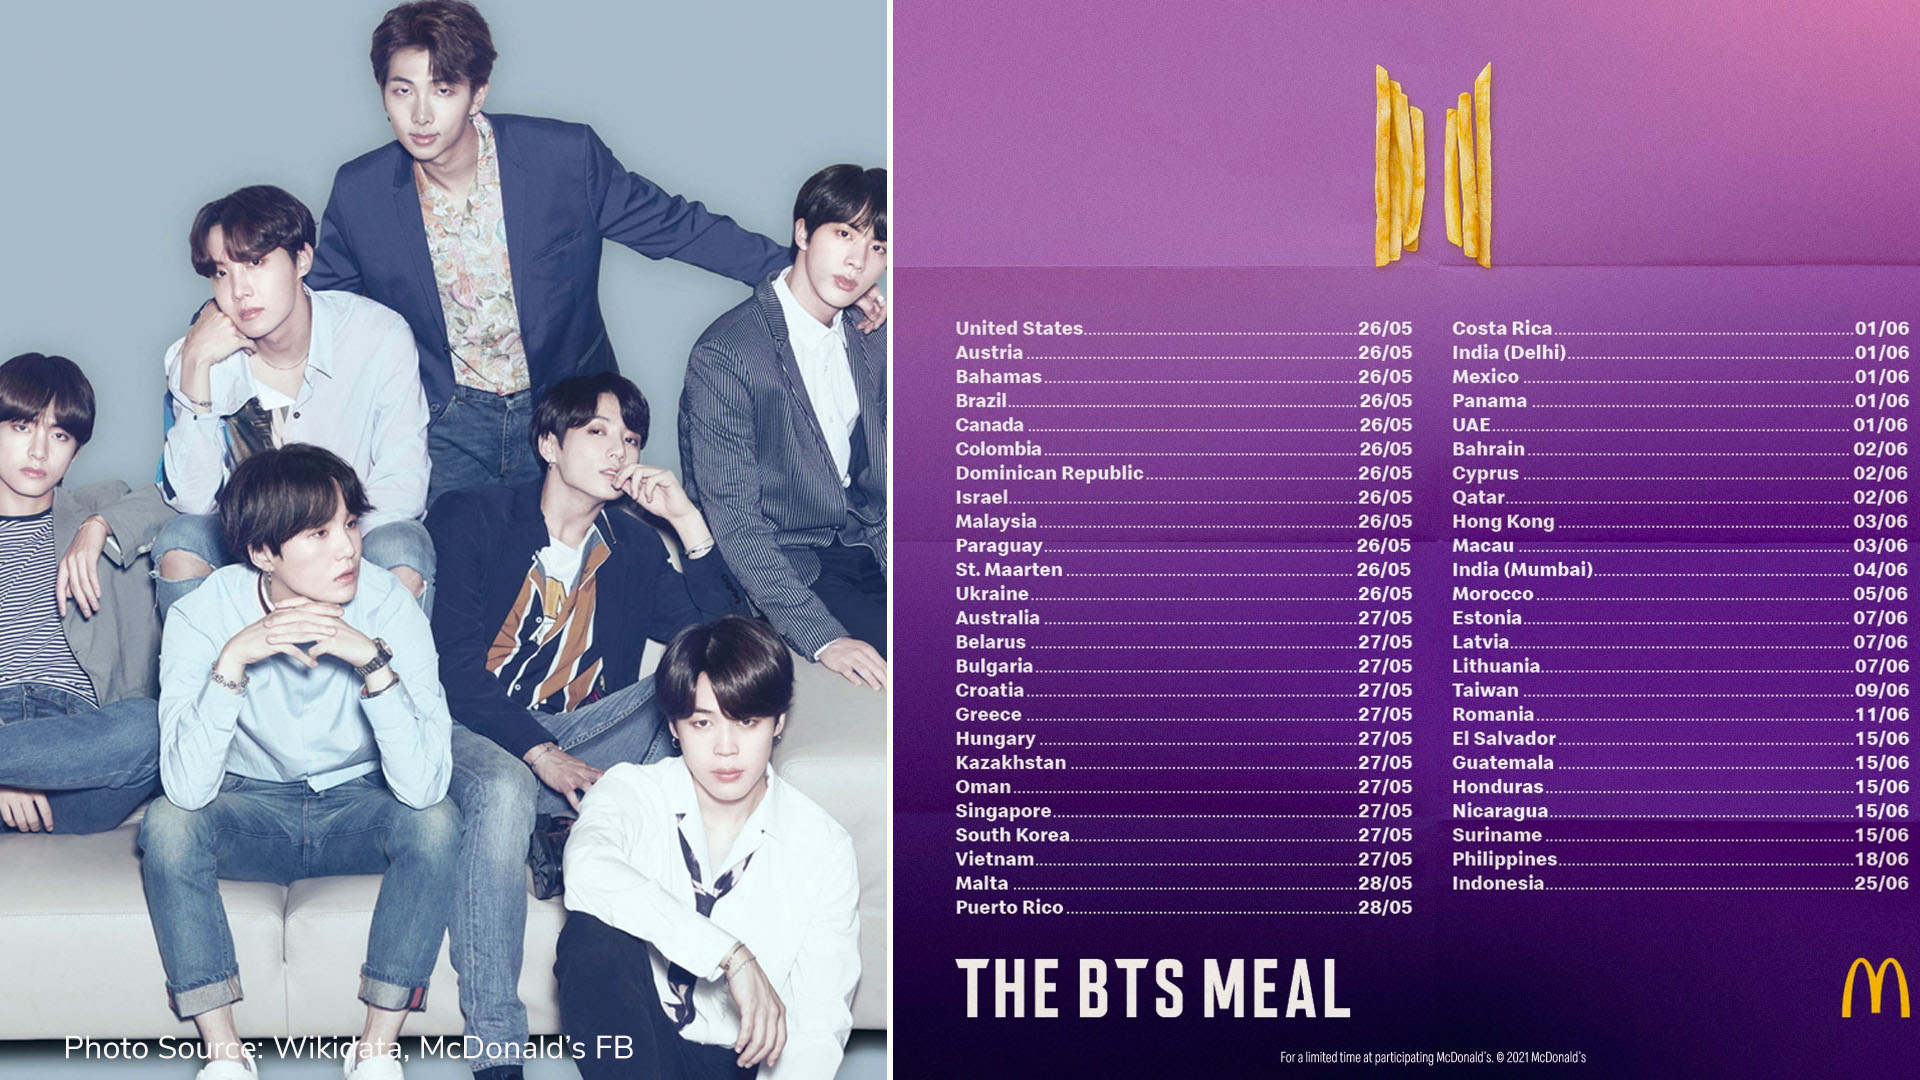 McDonald's announce BTS collaboration and it's actually coming to Malta